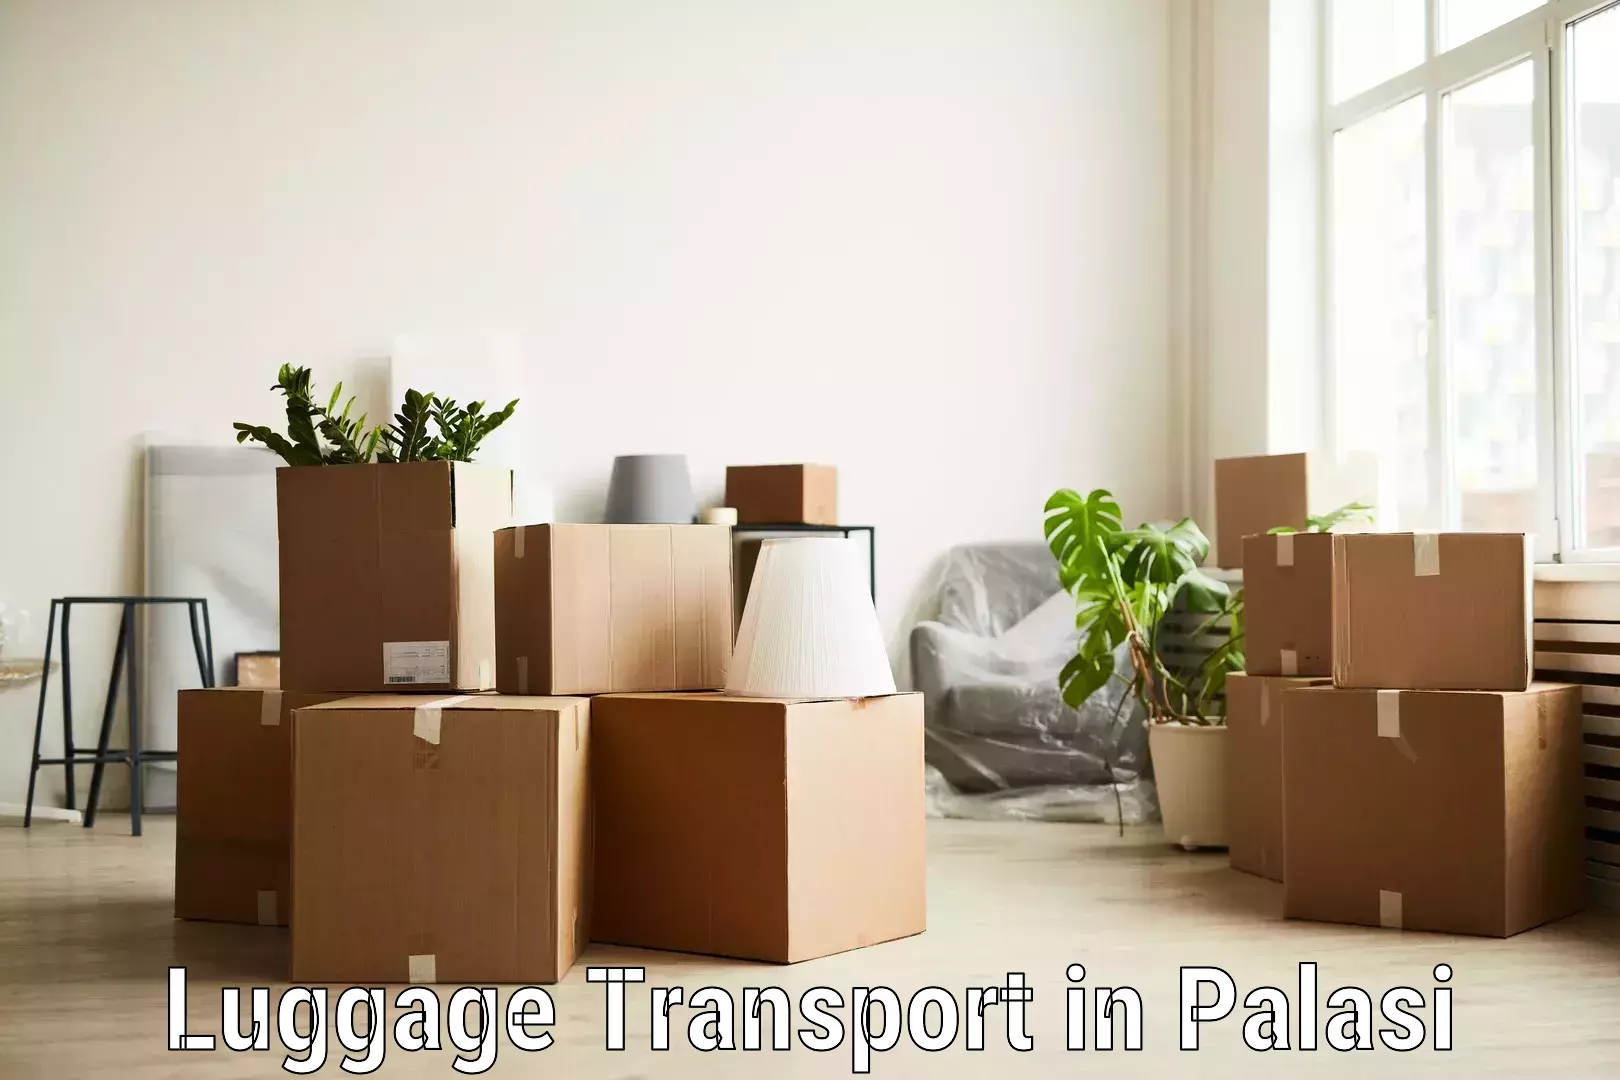 Discounted baggage transport in Palasi